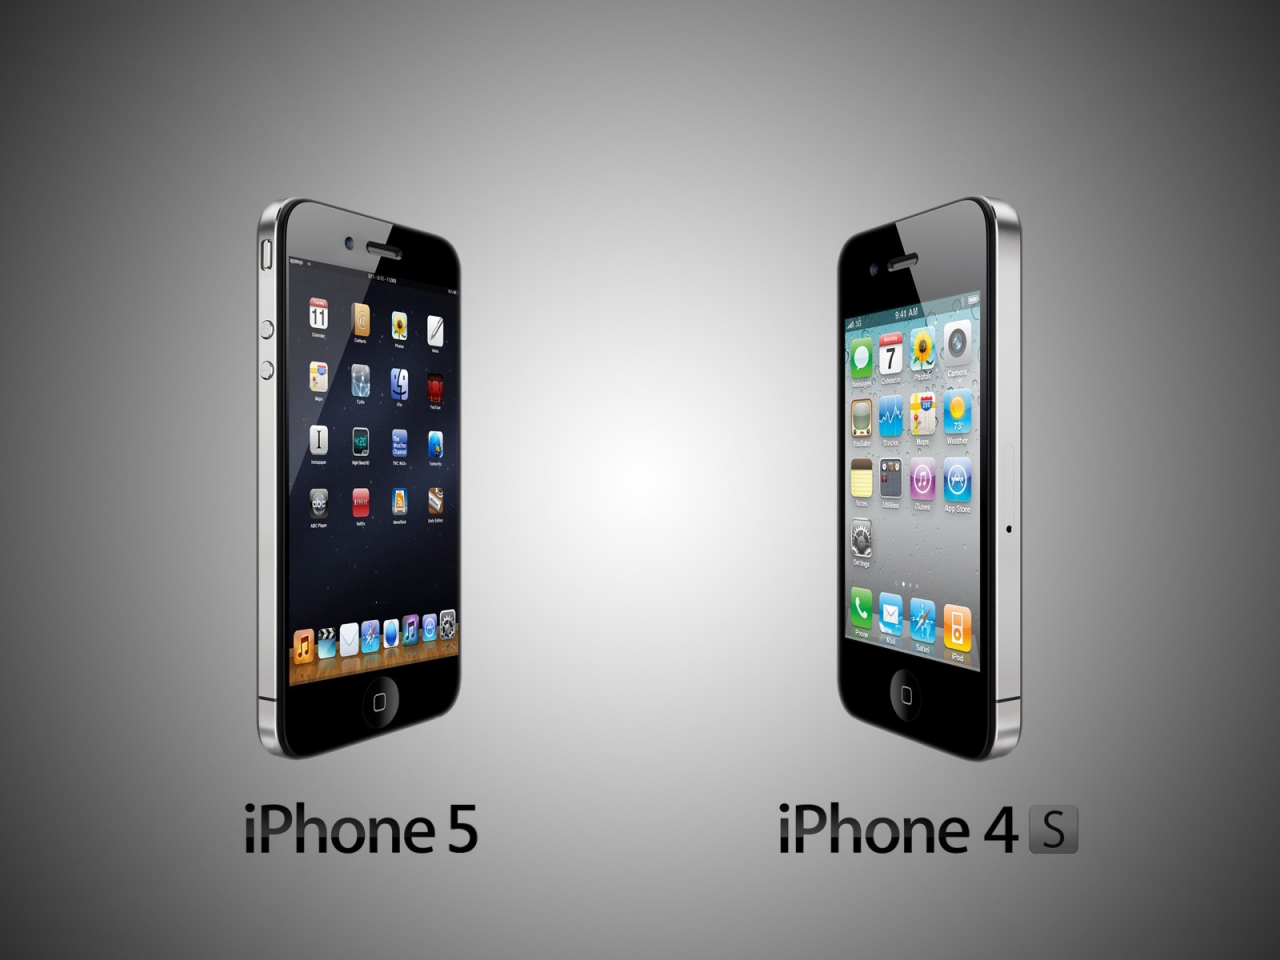 iPhone 4S and iPhone 5 for 1280 x 960 resolution